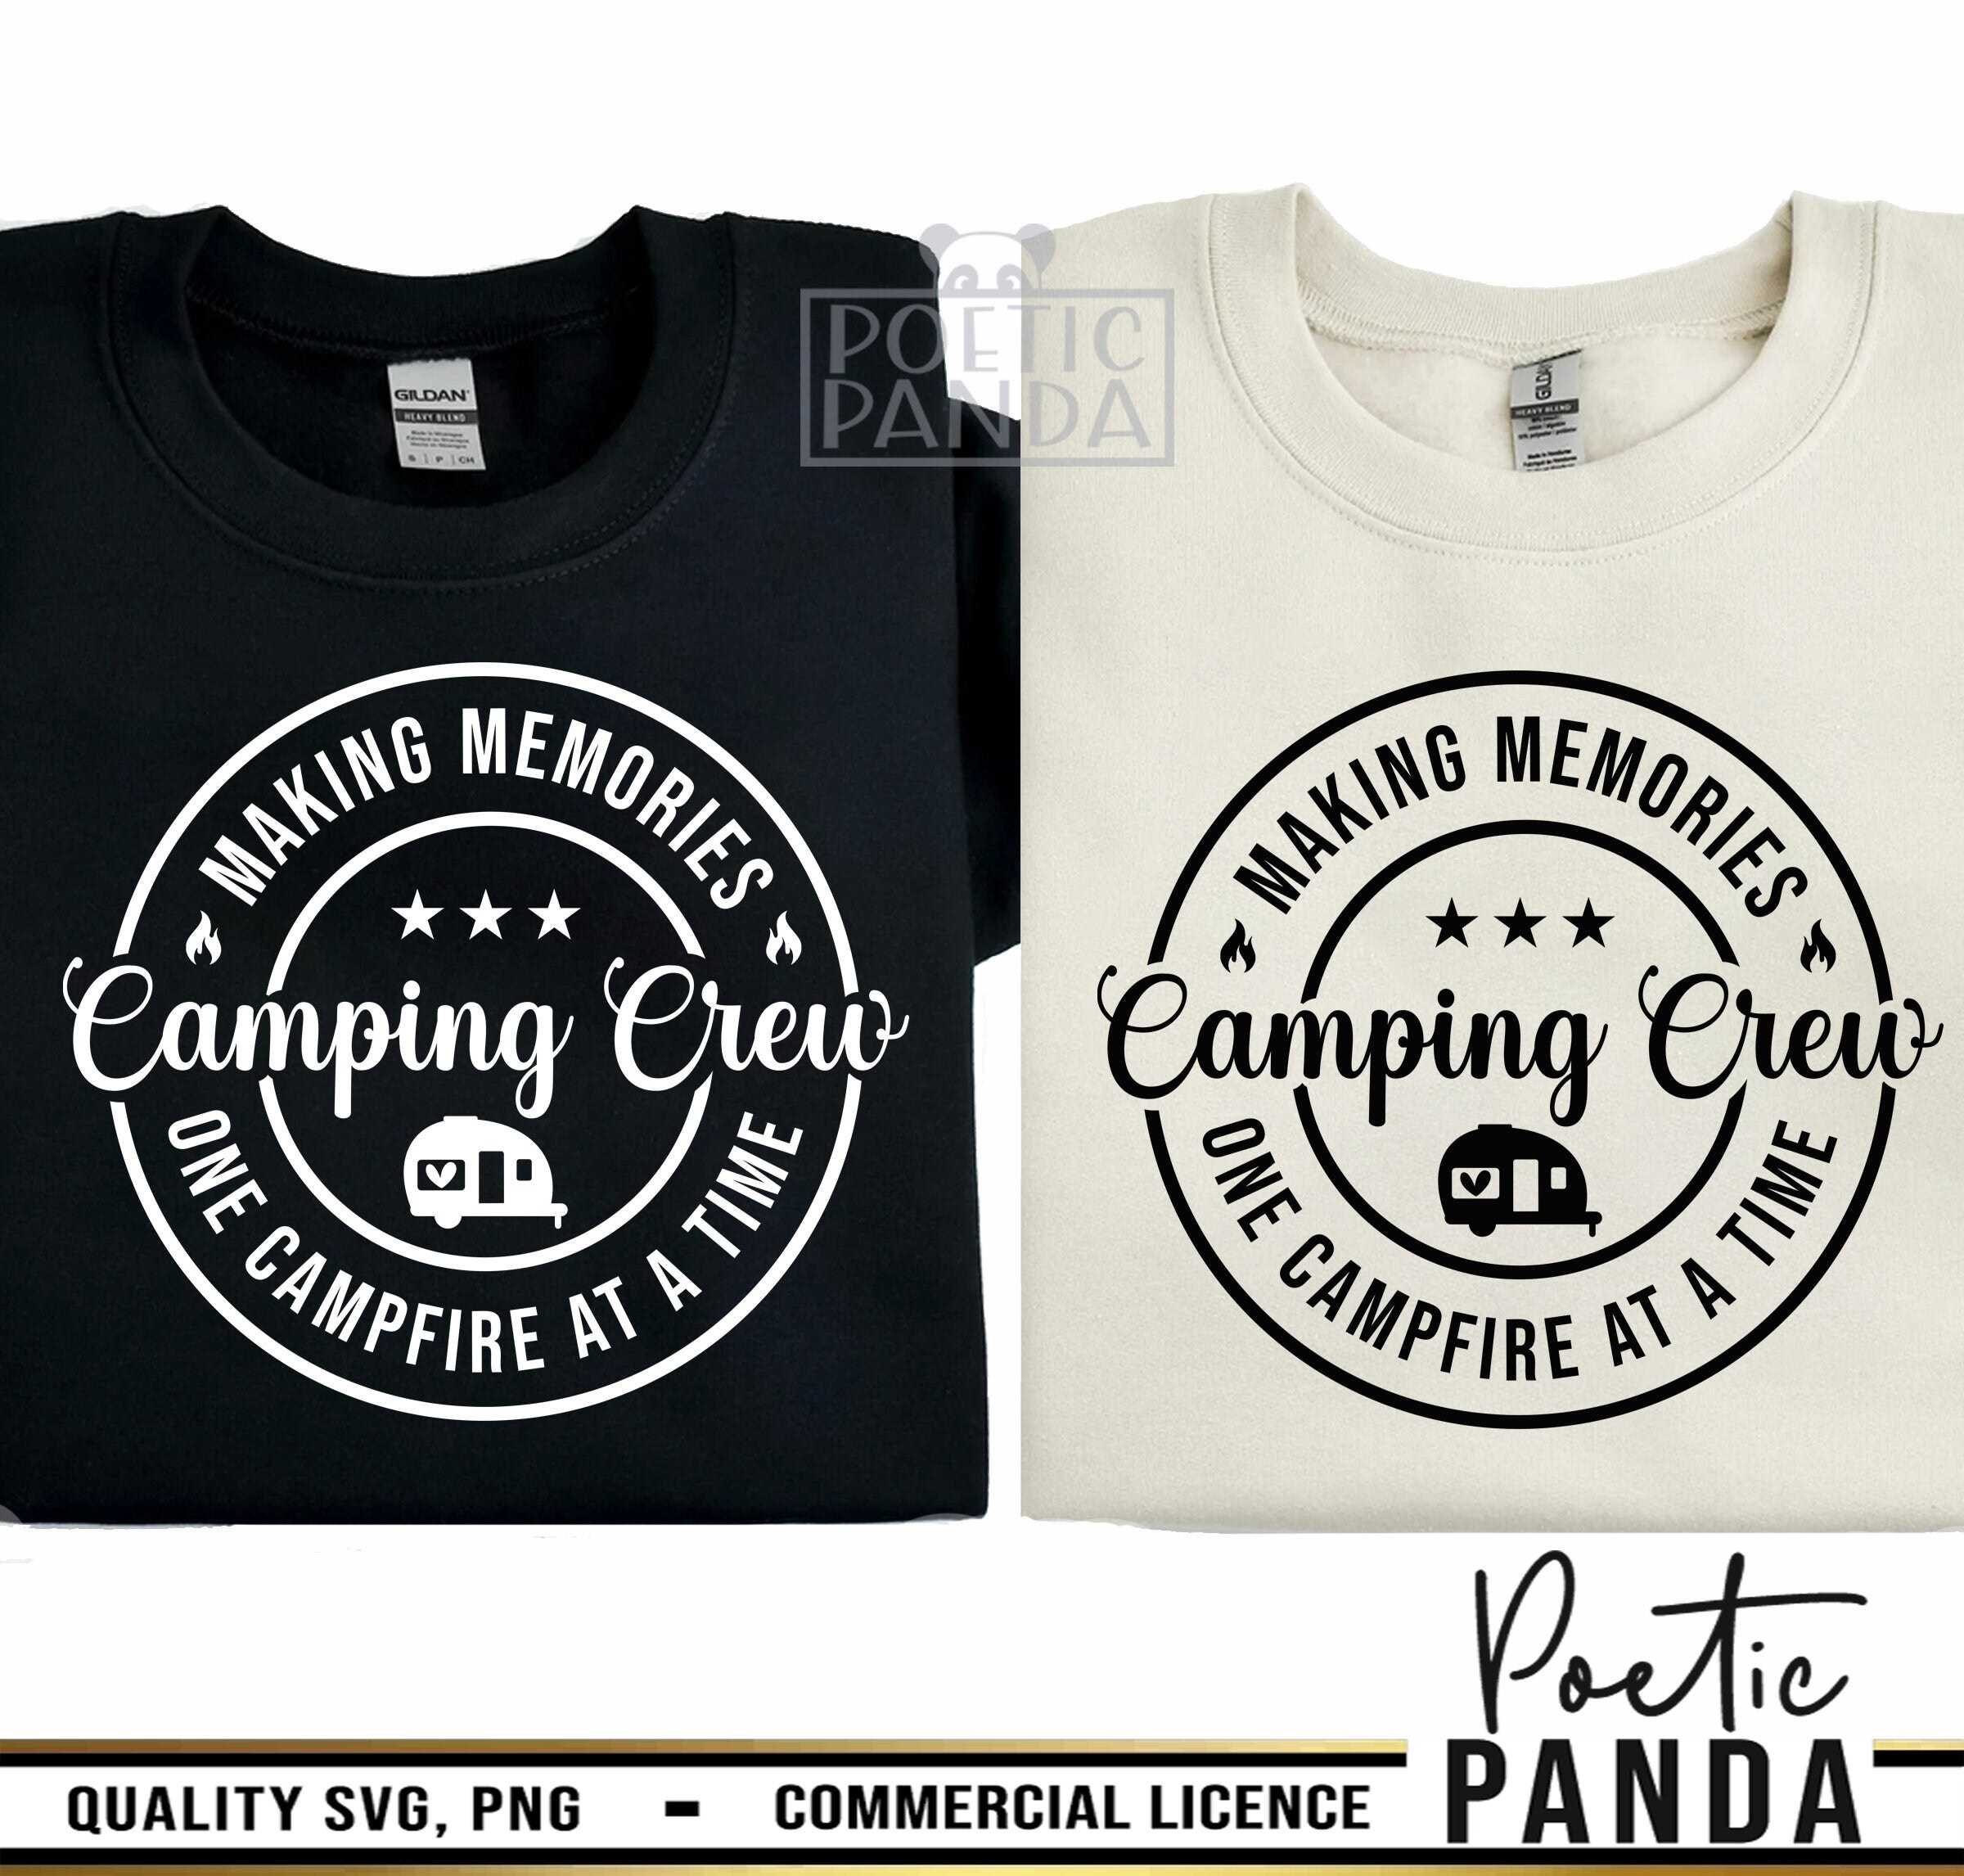 Camping Crew SVG PNG, Smore Svg, One Campfire at time Svg, Happy Camper Svg, Camping Vacation Svg, Camping Shirt Svg, Camping Squad Svg